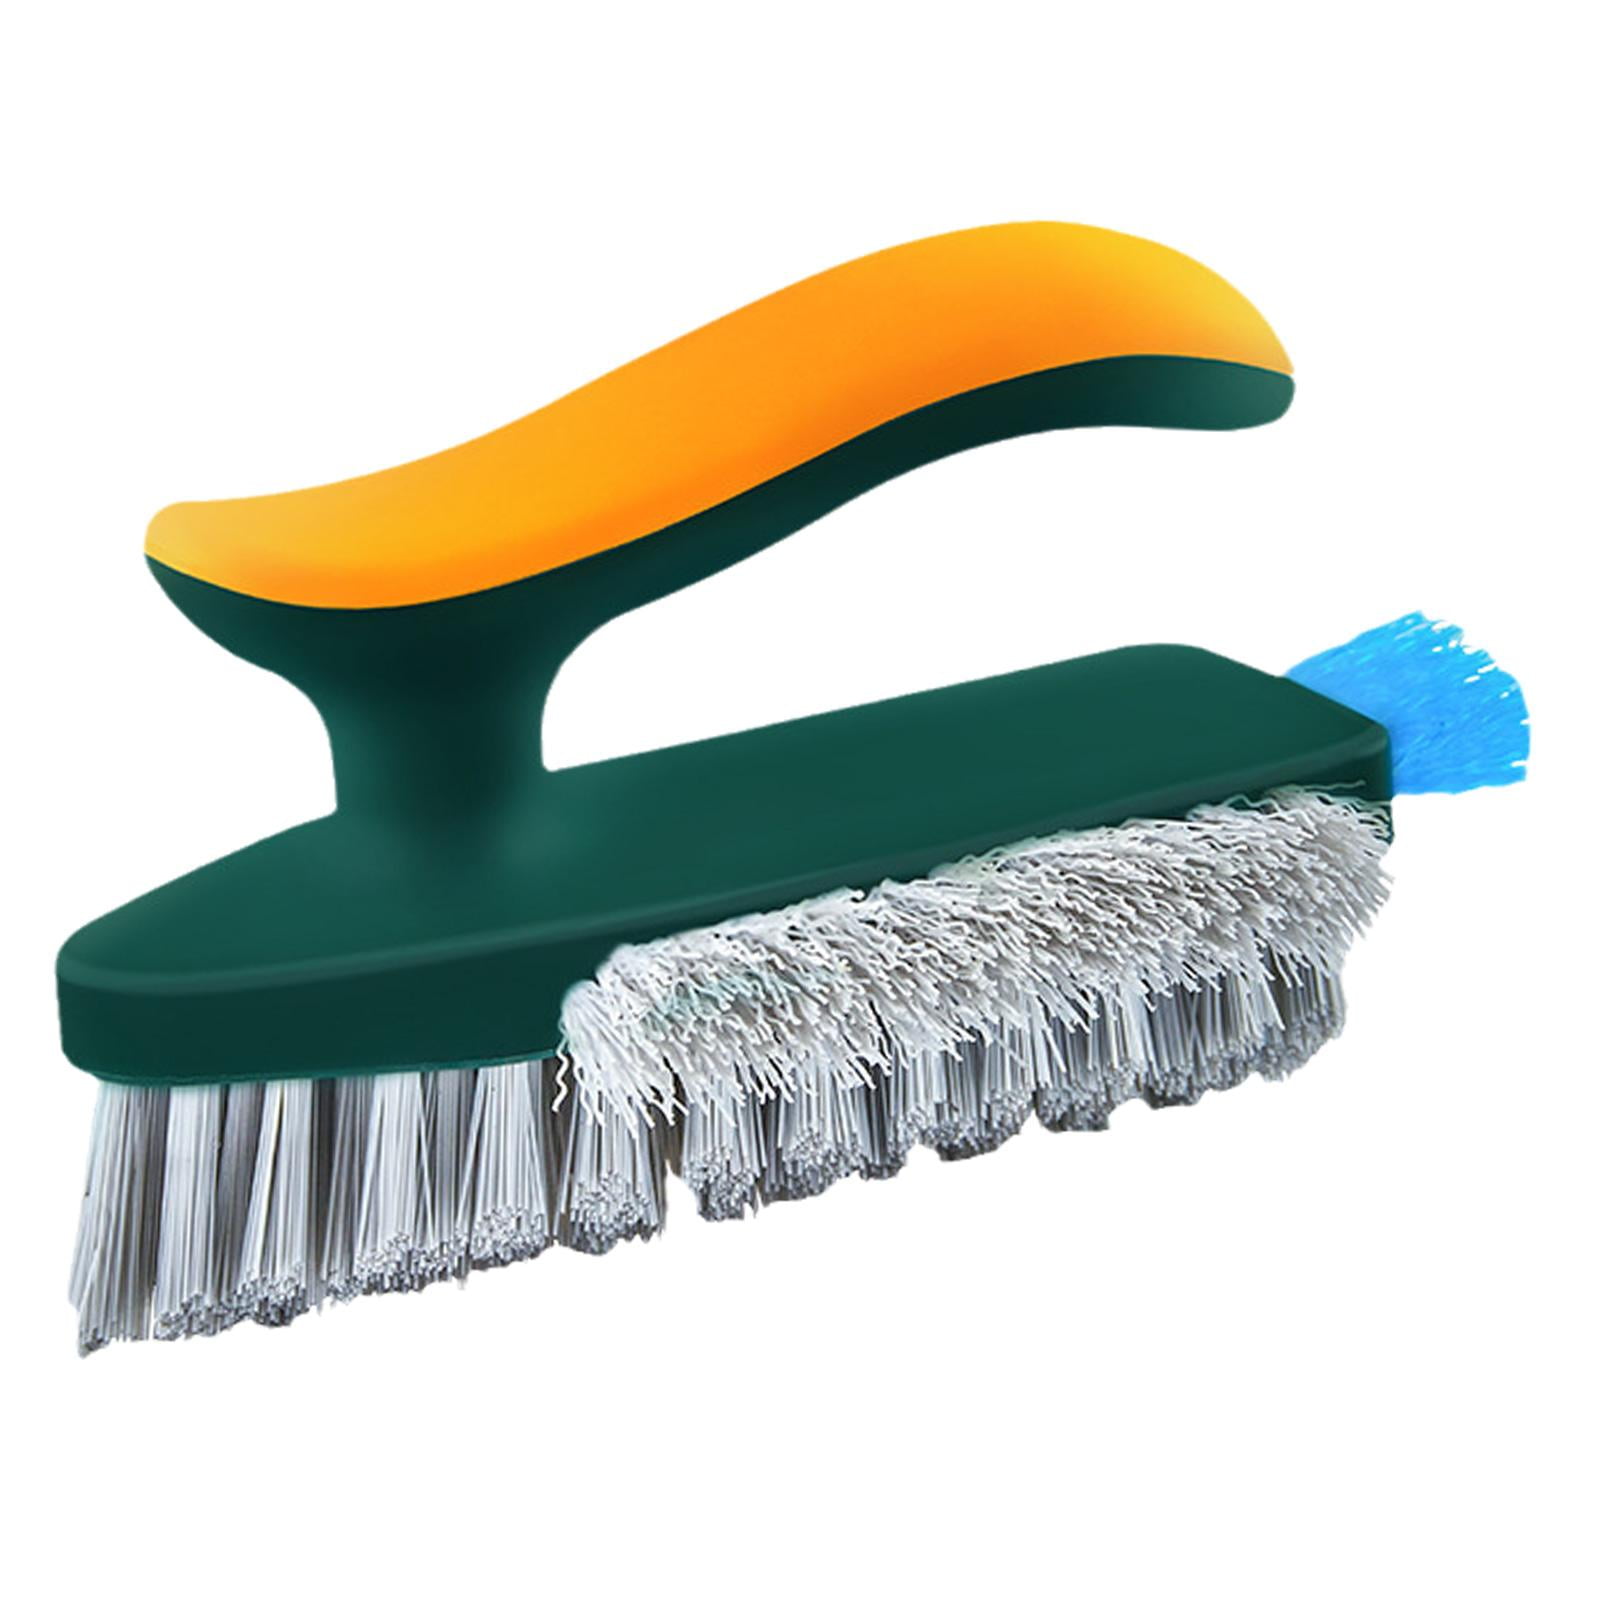 3 in 1 Cleaning Brush Bathroom Kitchen Floor Scrub Crevice Brush Brushes  W2L8